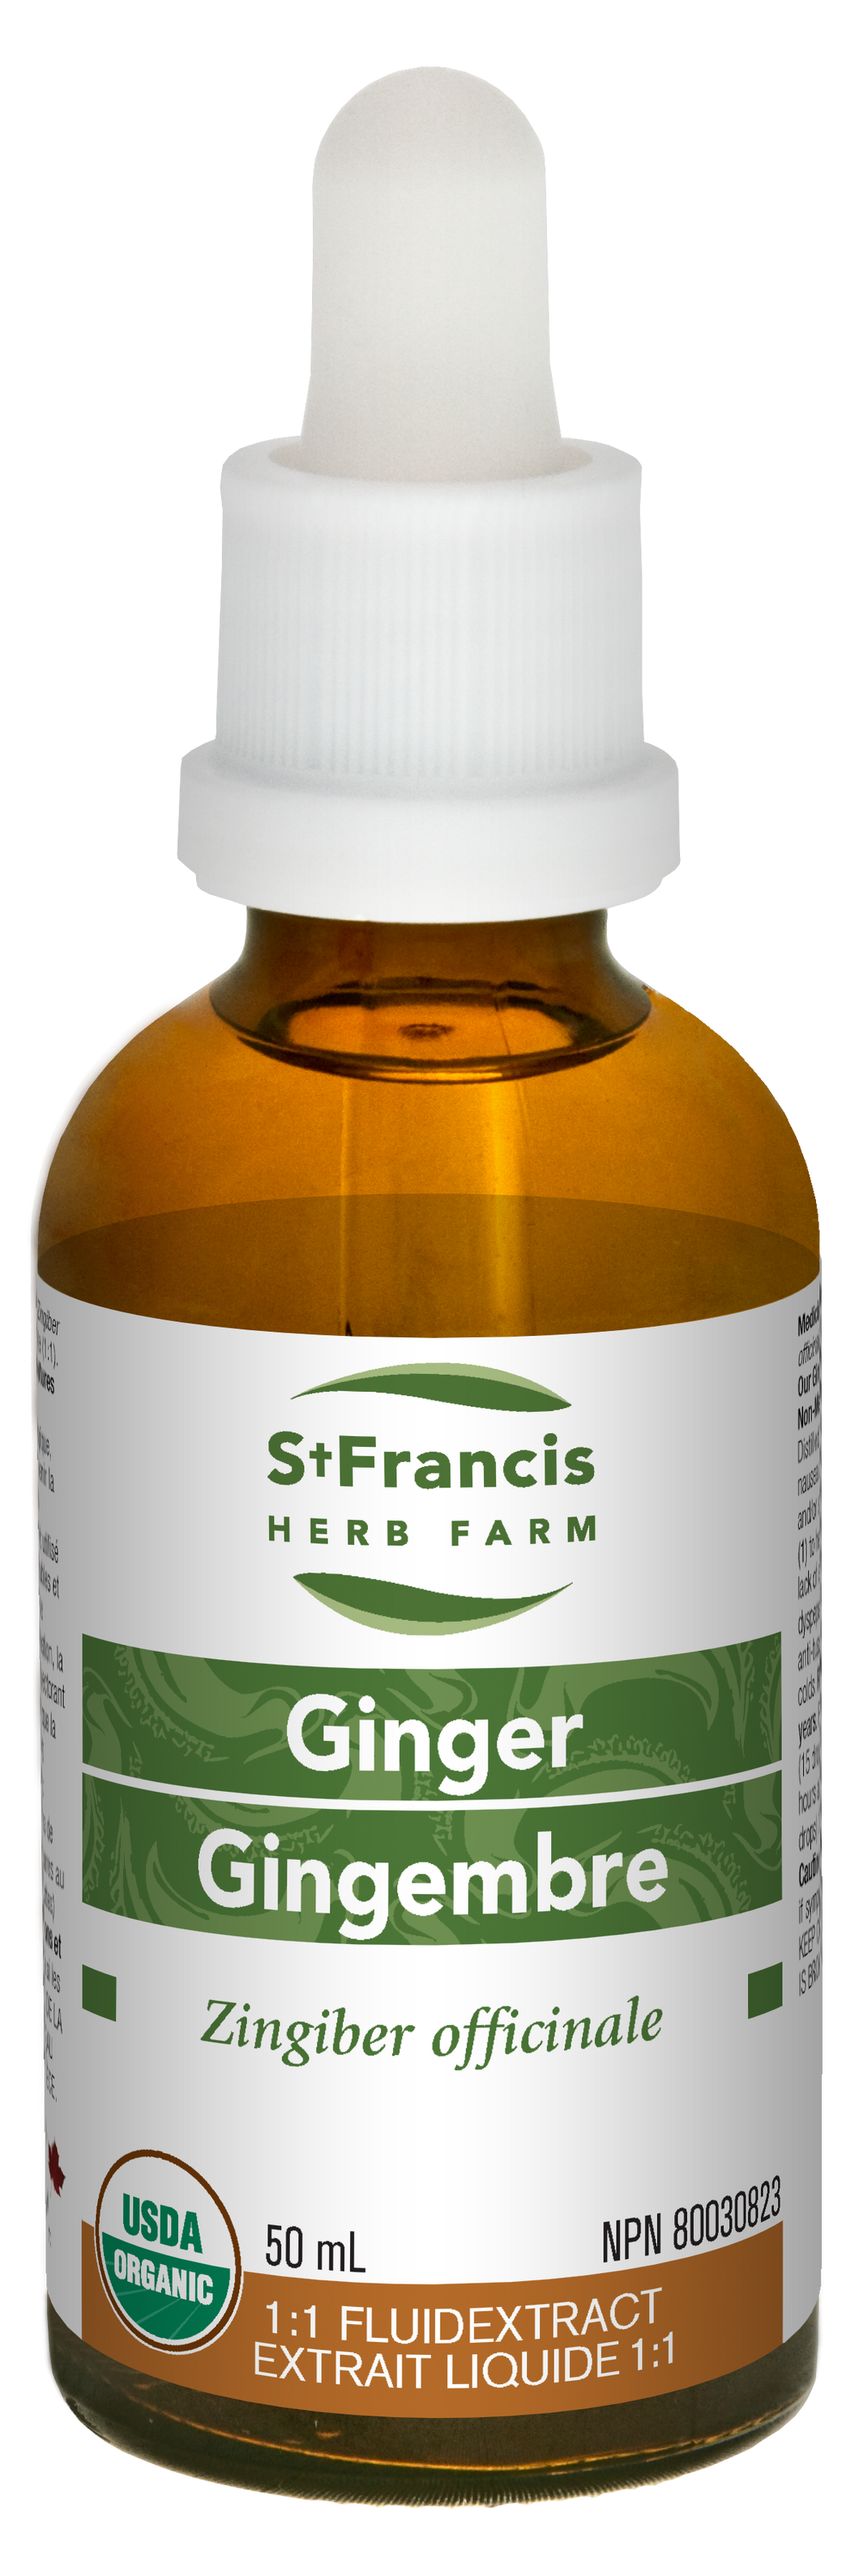 St. Francis - Ginger Fluid Extract 1:1 (50mL)